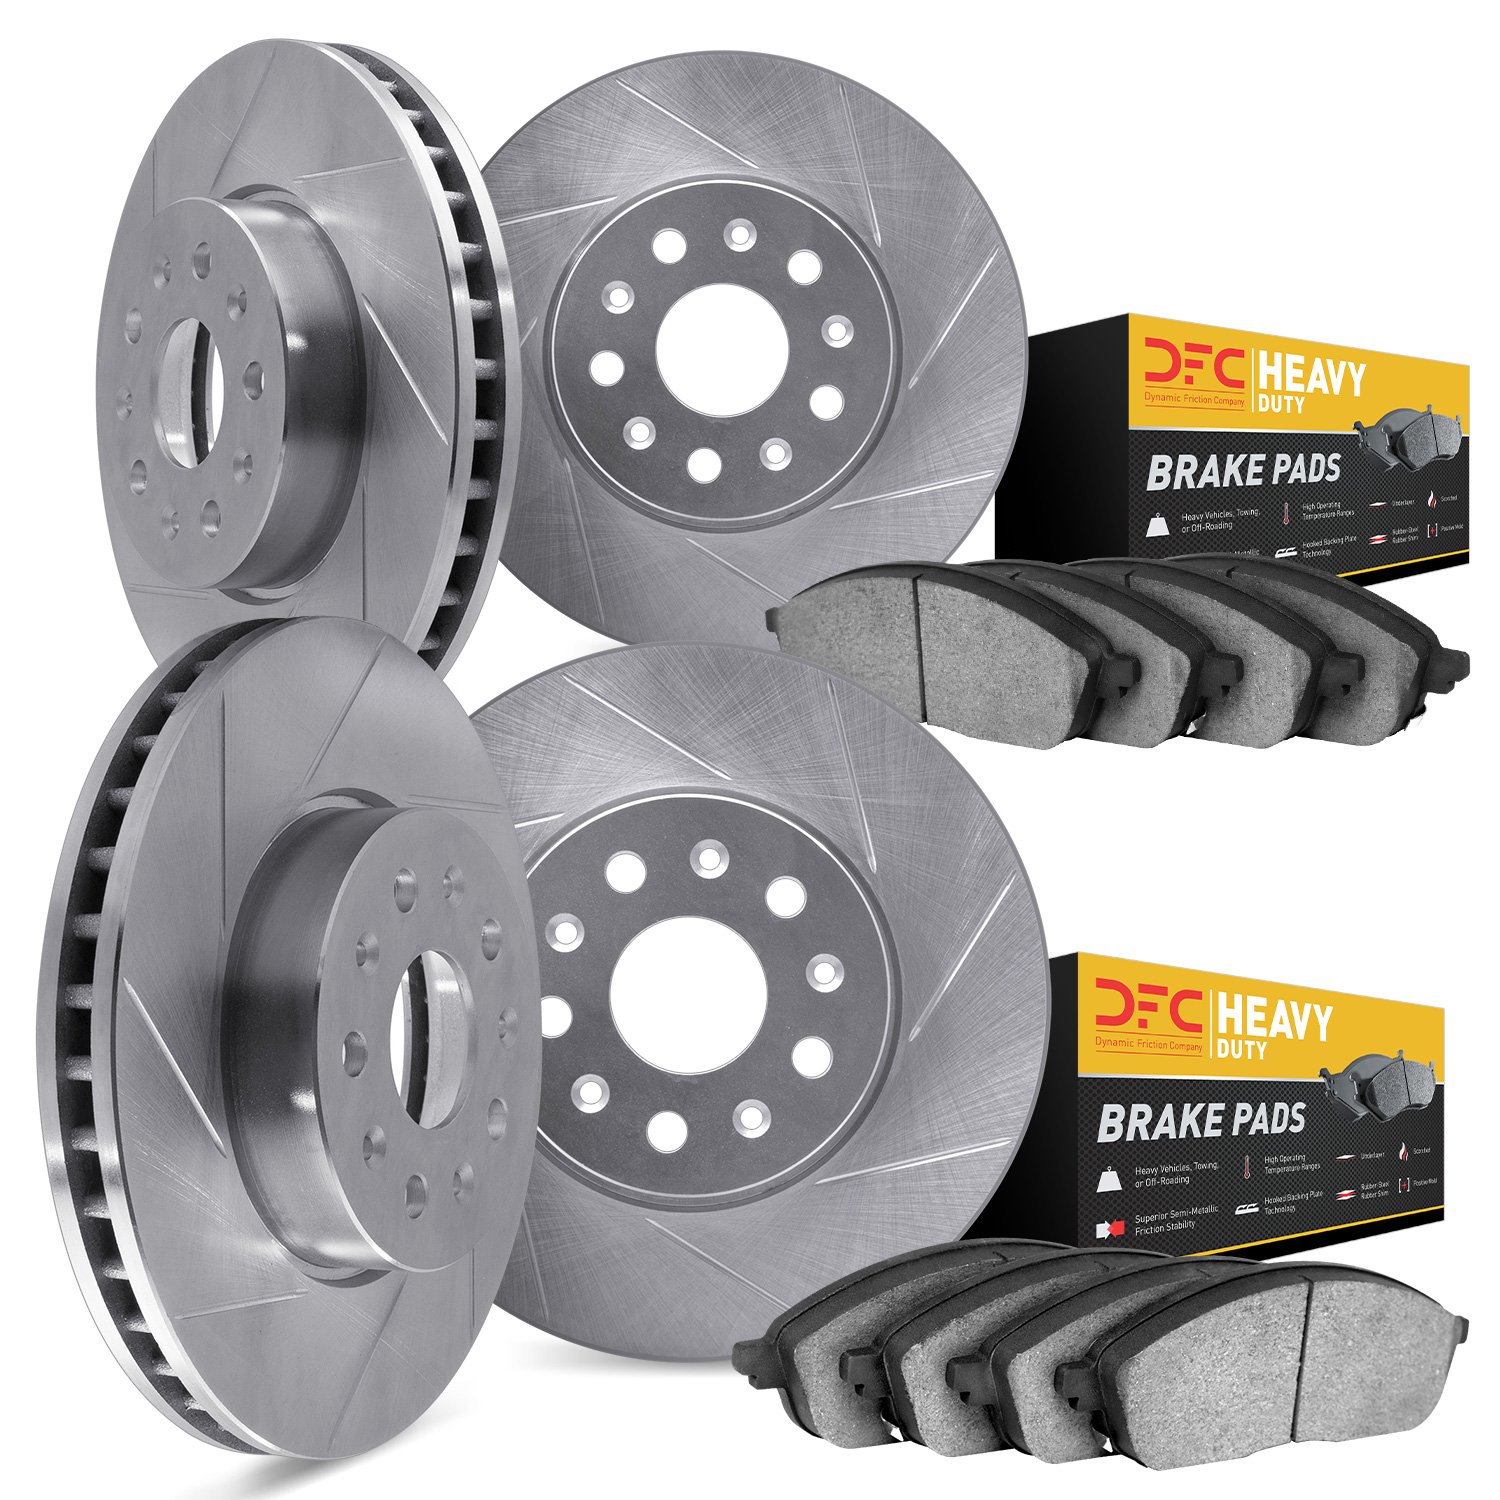 5204-42011 Slotted Brake Rotors w/Heavy-Duty Brake Pads Kits [Silver], Fits Select Mopar, Position: Front and Rear